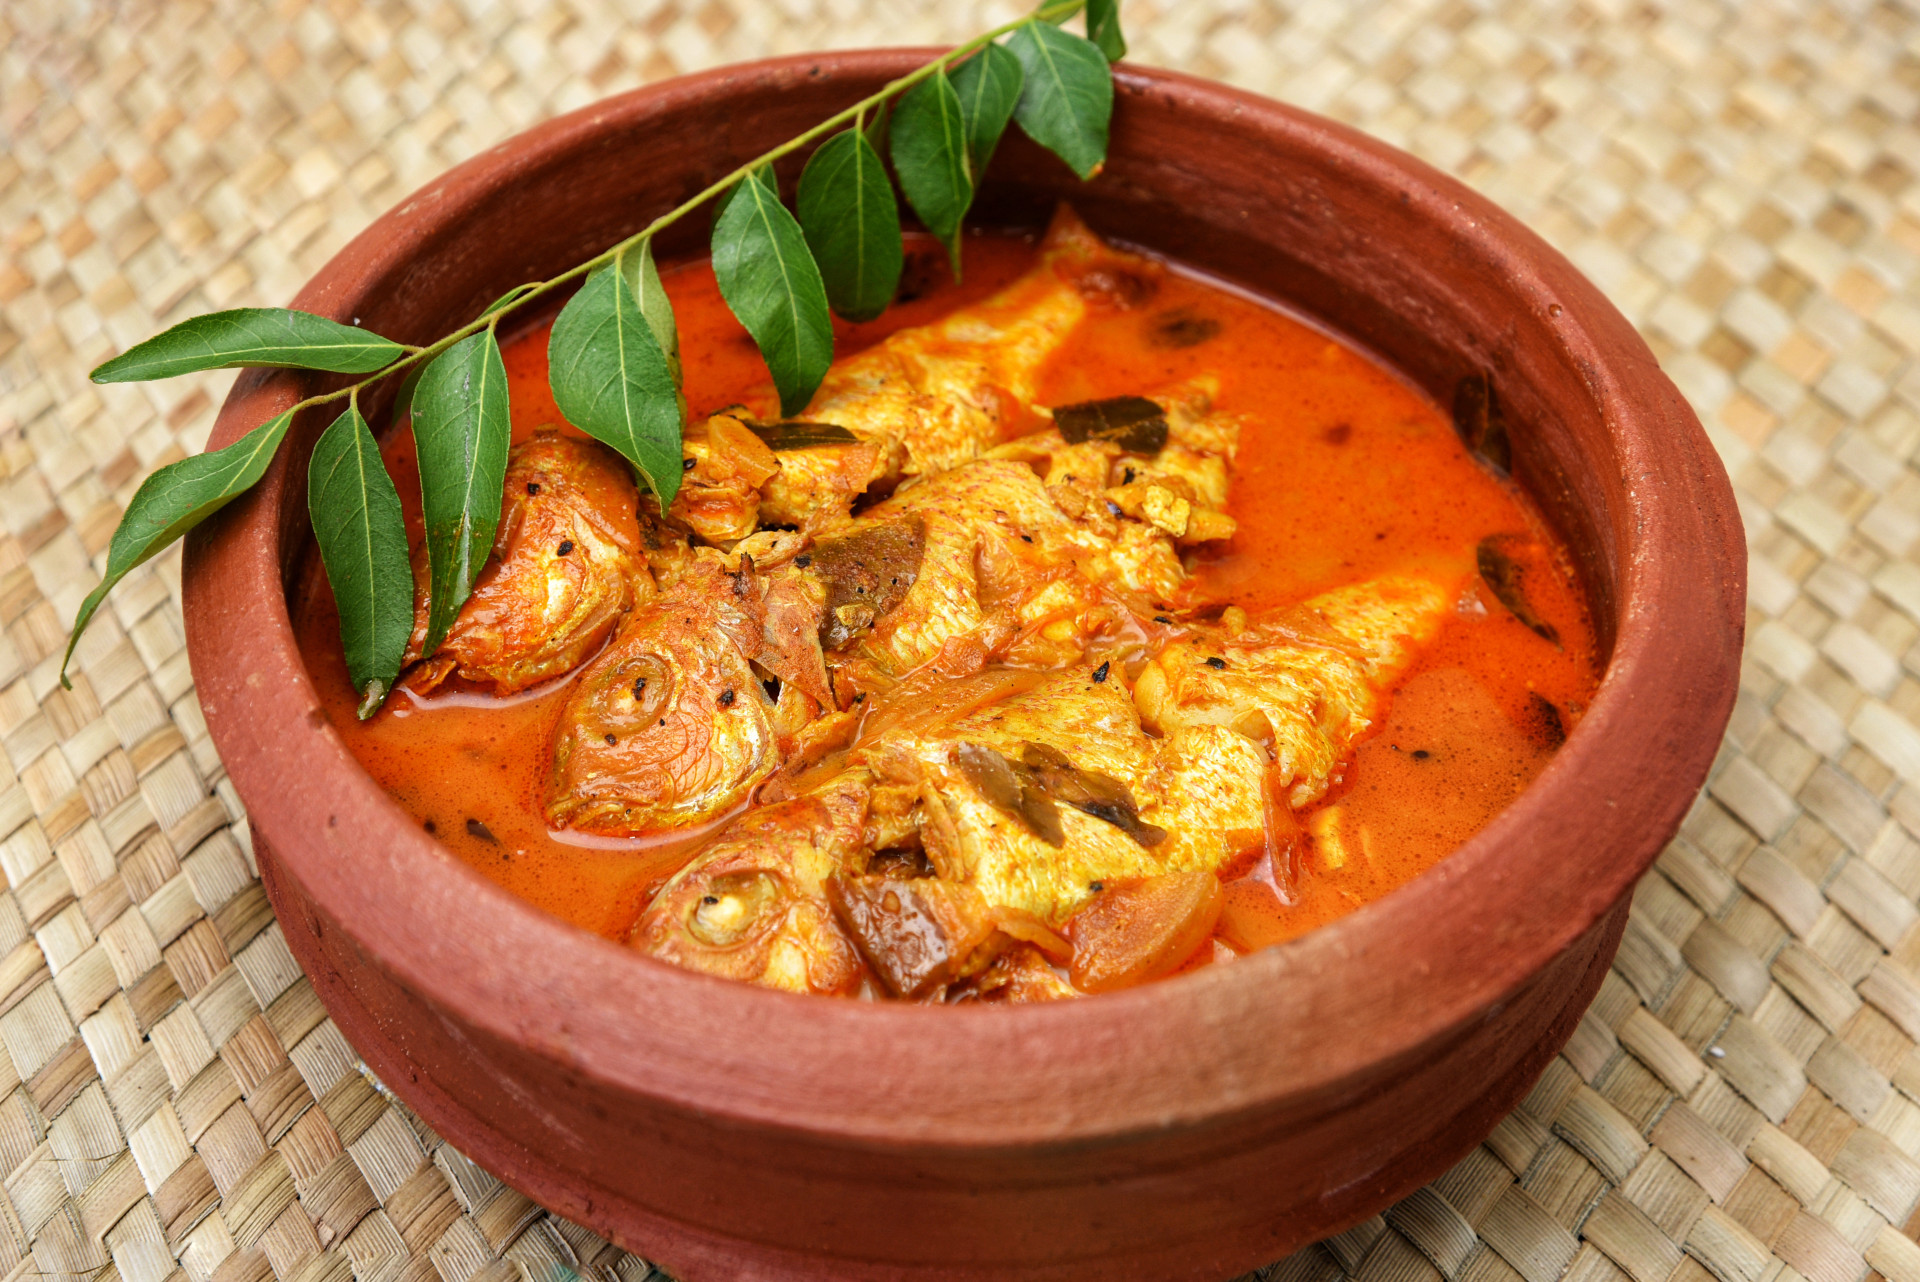 Indian, Dutch, and Indonesian influences have helped flavor Sri Lankan cuisine. Expect rice, coconut, and spices in most foods, exemplified by dishes such as sour fish curry (pictured).<p><a href="https://www.msn.com/en-us/community/channel/vid-7xx8mnucu55yw63we9va2gwr7uihbxwc68fxqp25x6tg4ftibpra?cvid=94631541bc0f4f89bfd59158d696ad7e">Follow us and access great exclusive content every day</a></p>